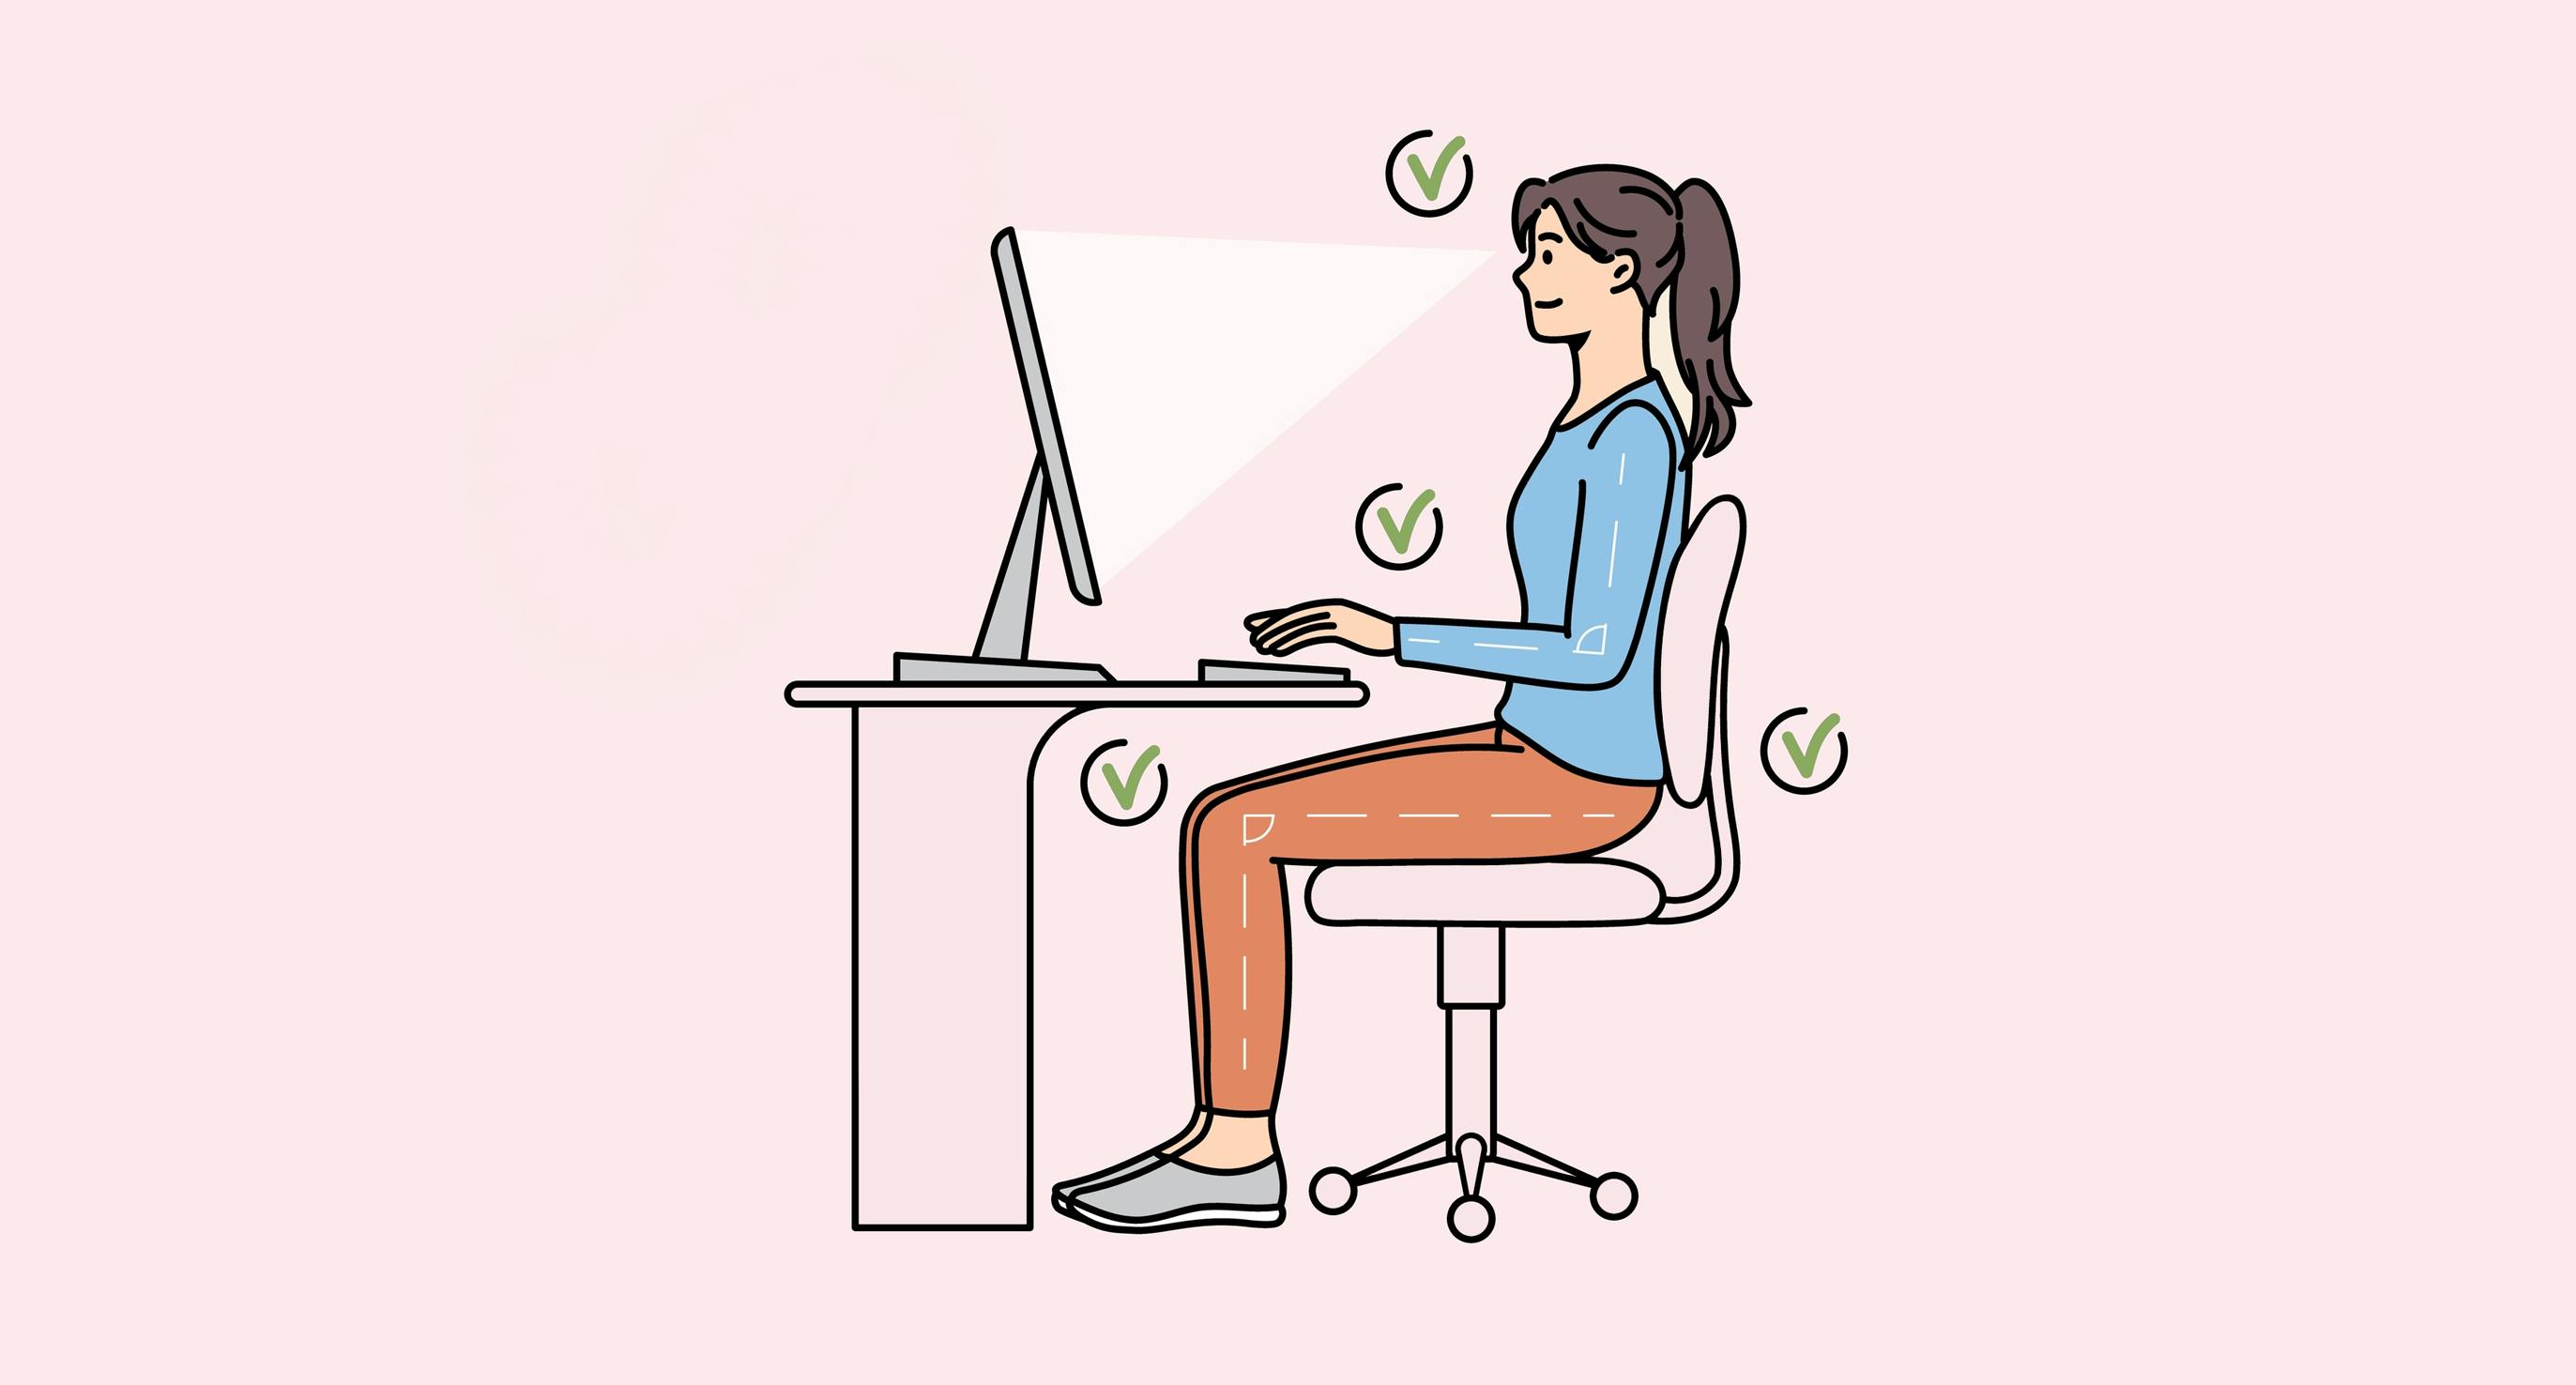 Common posture problems and how to fix them